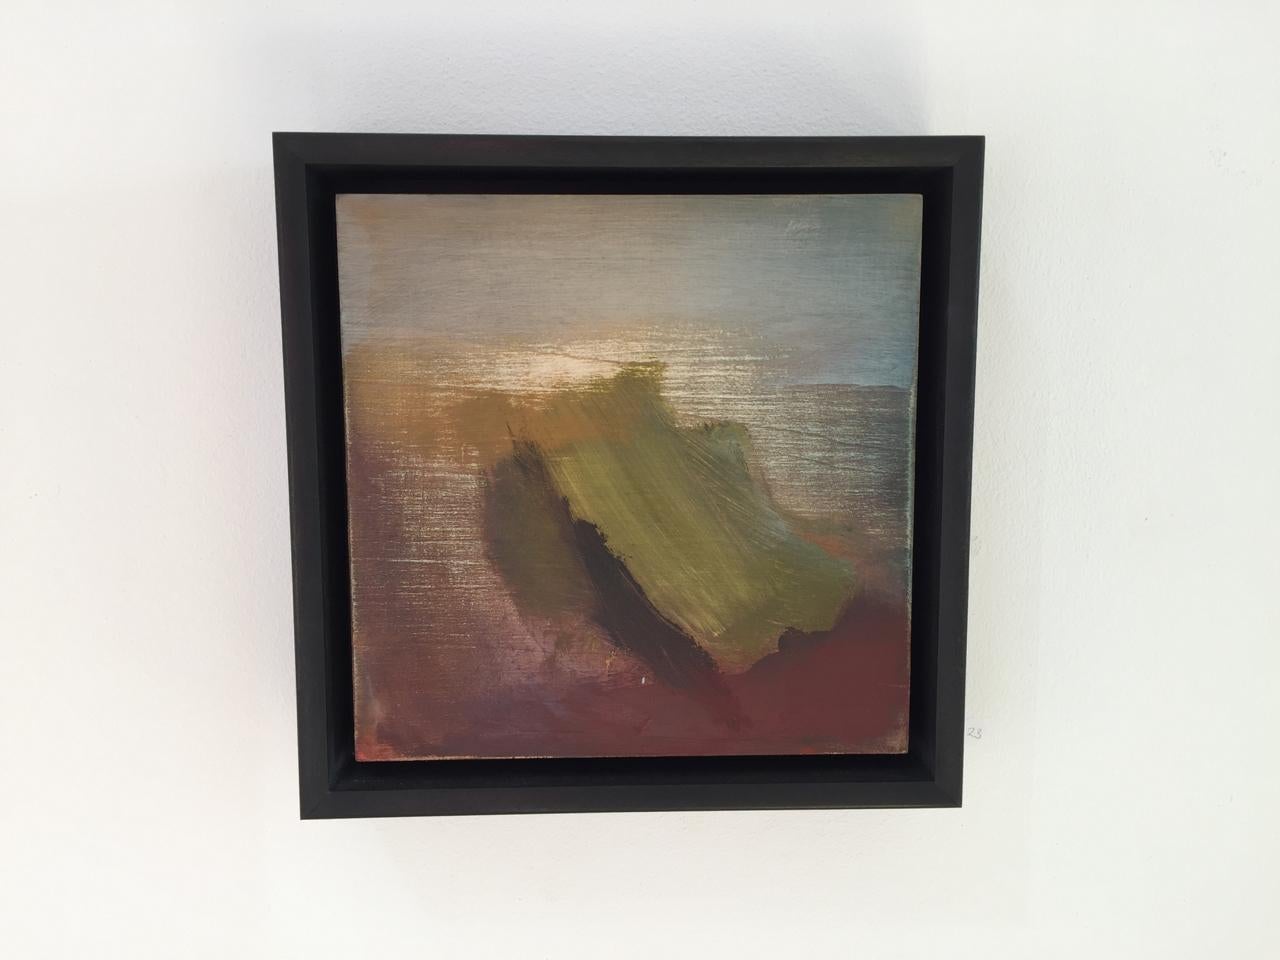 Move Brood, 2017, Oil on wood panel, 9 2/5 × 9 2/5 × 2 in; 24 × 24 × 5 cm cm, framed

As a collaboration of two artists painting on the same canvas, with very different methods of using paint, Jason Robinson and Helen McMahon are guided by reaction